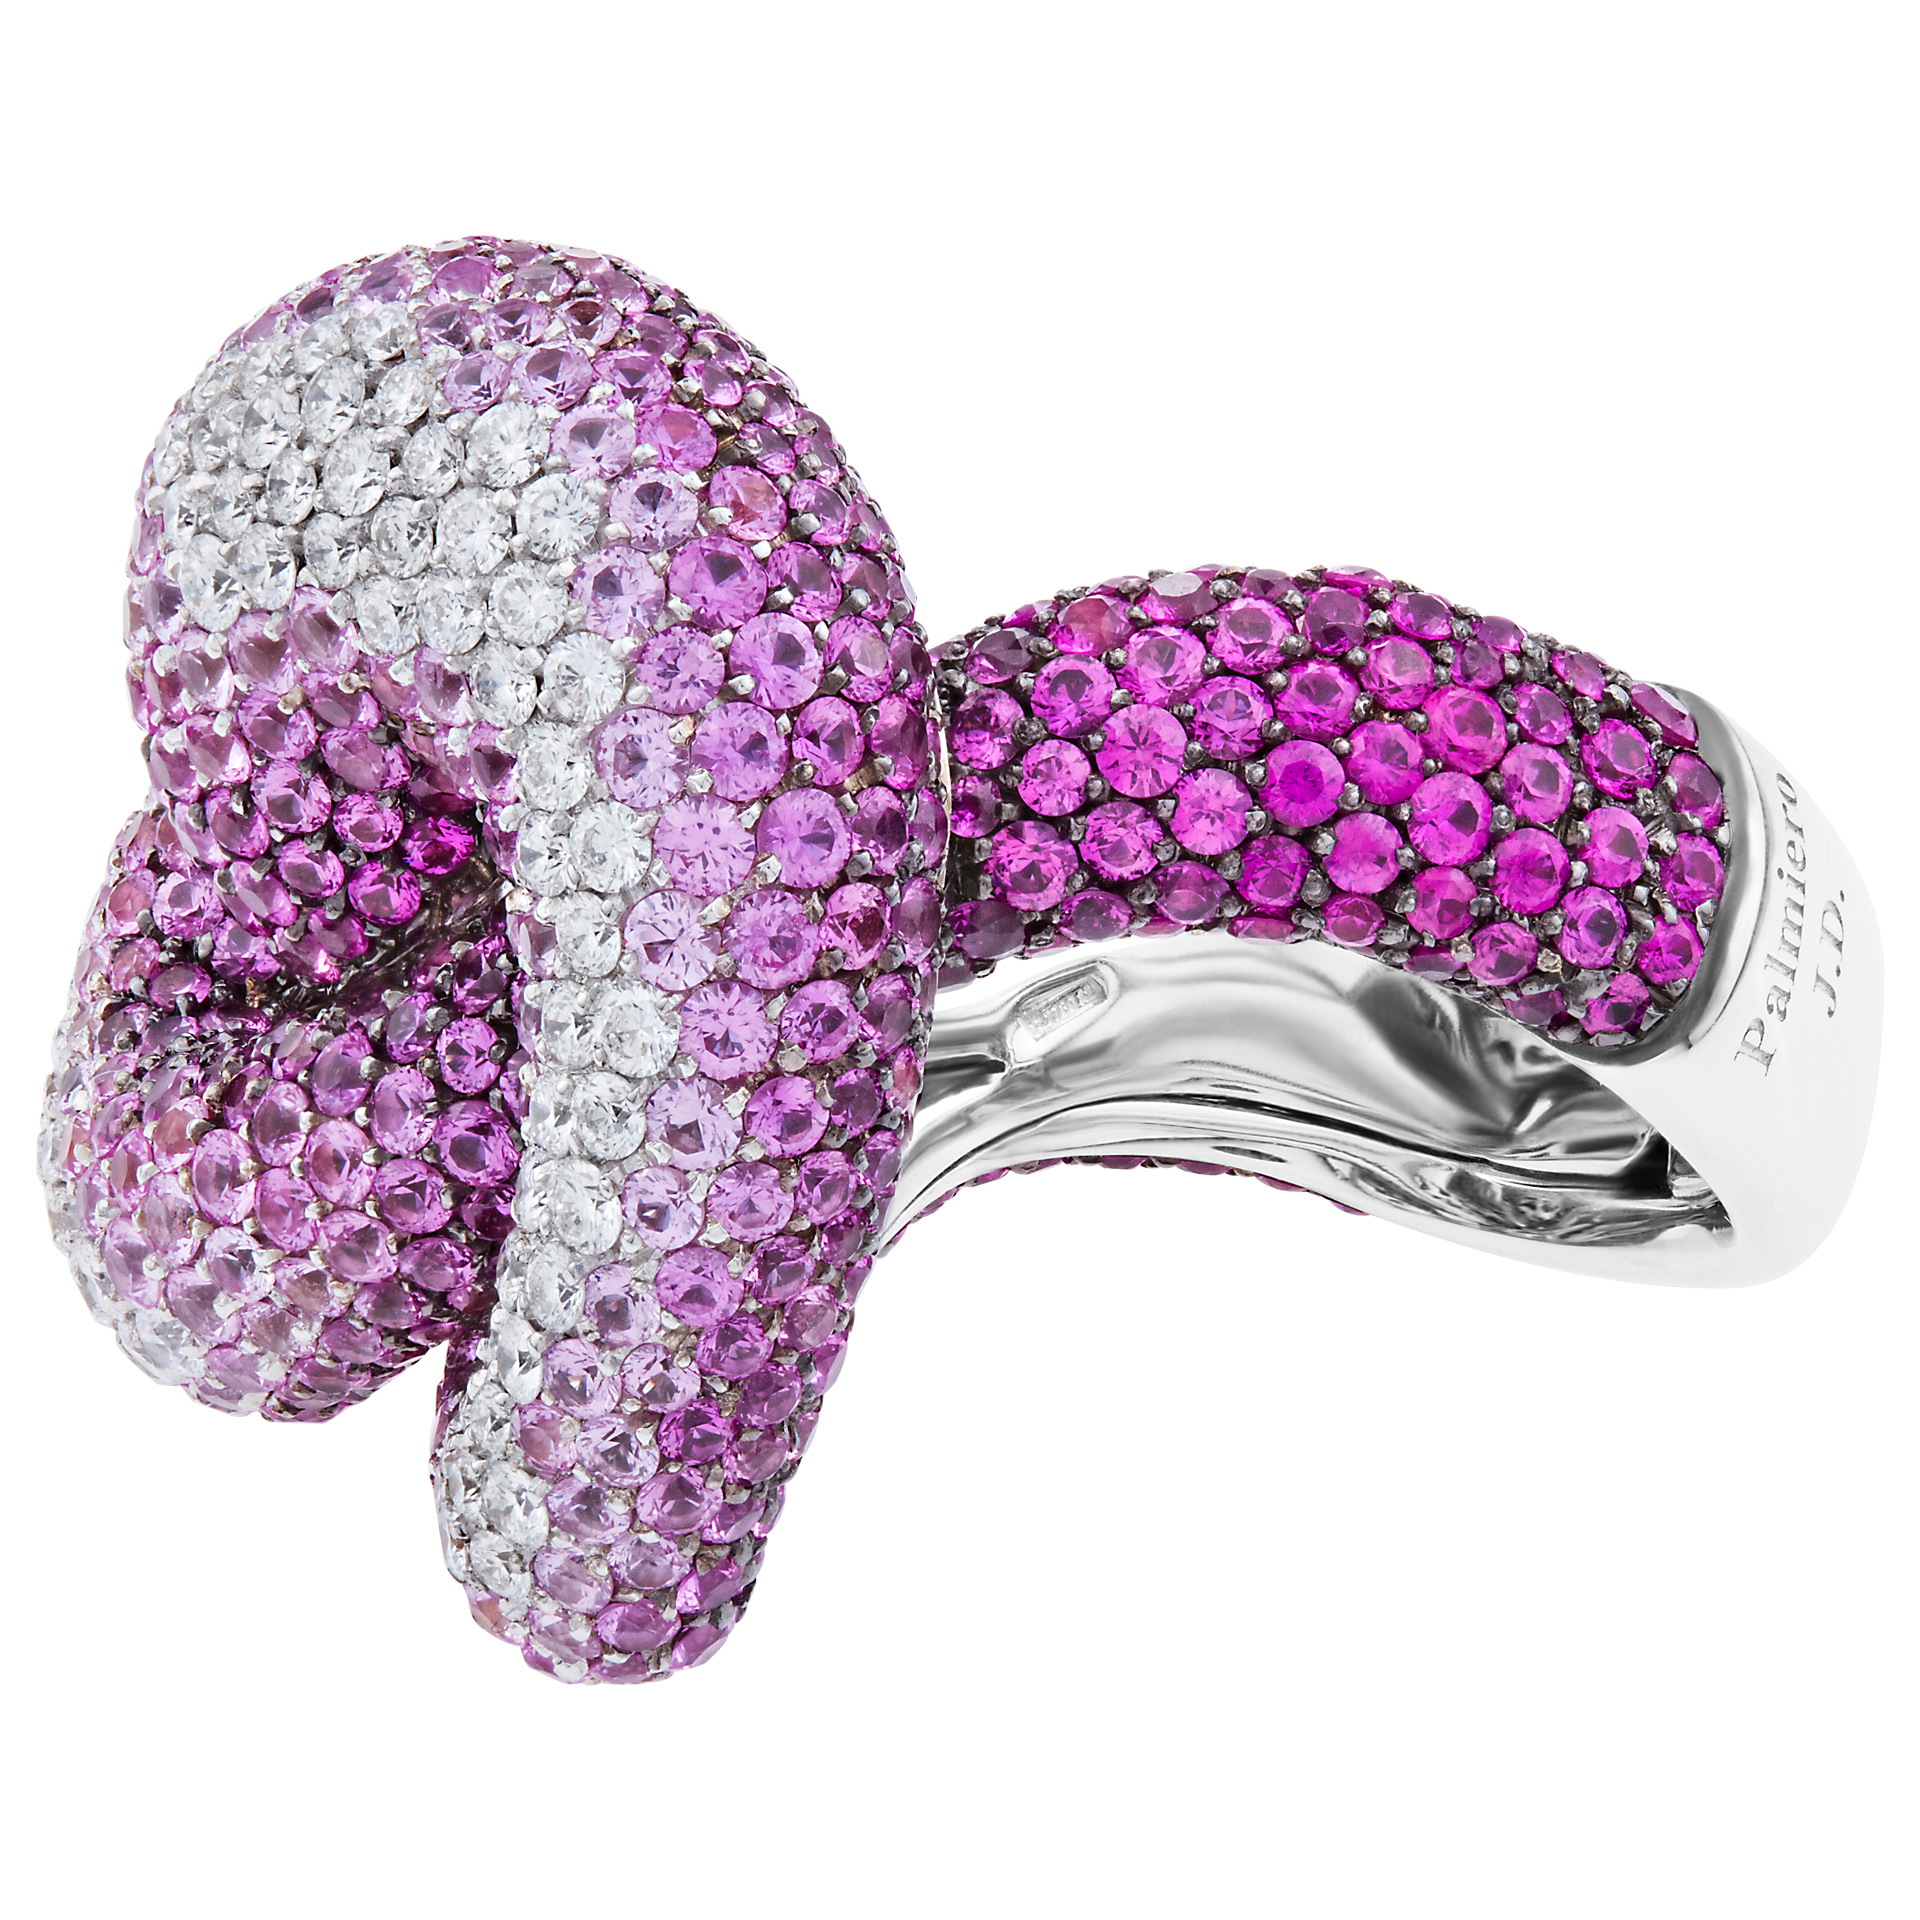 Gorgeous Palmiero J.D. "two hearts locked" pave diamond ring in 18k. image 3